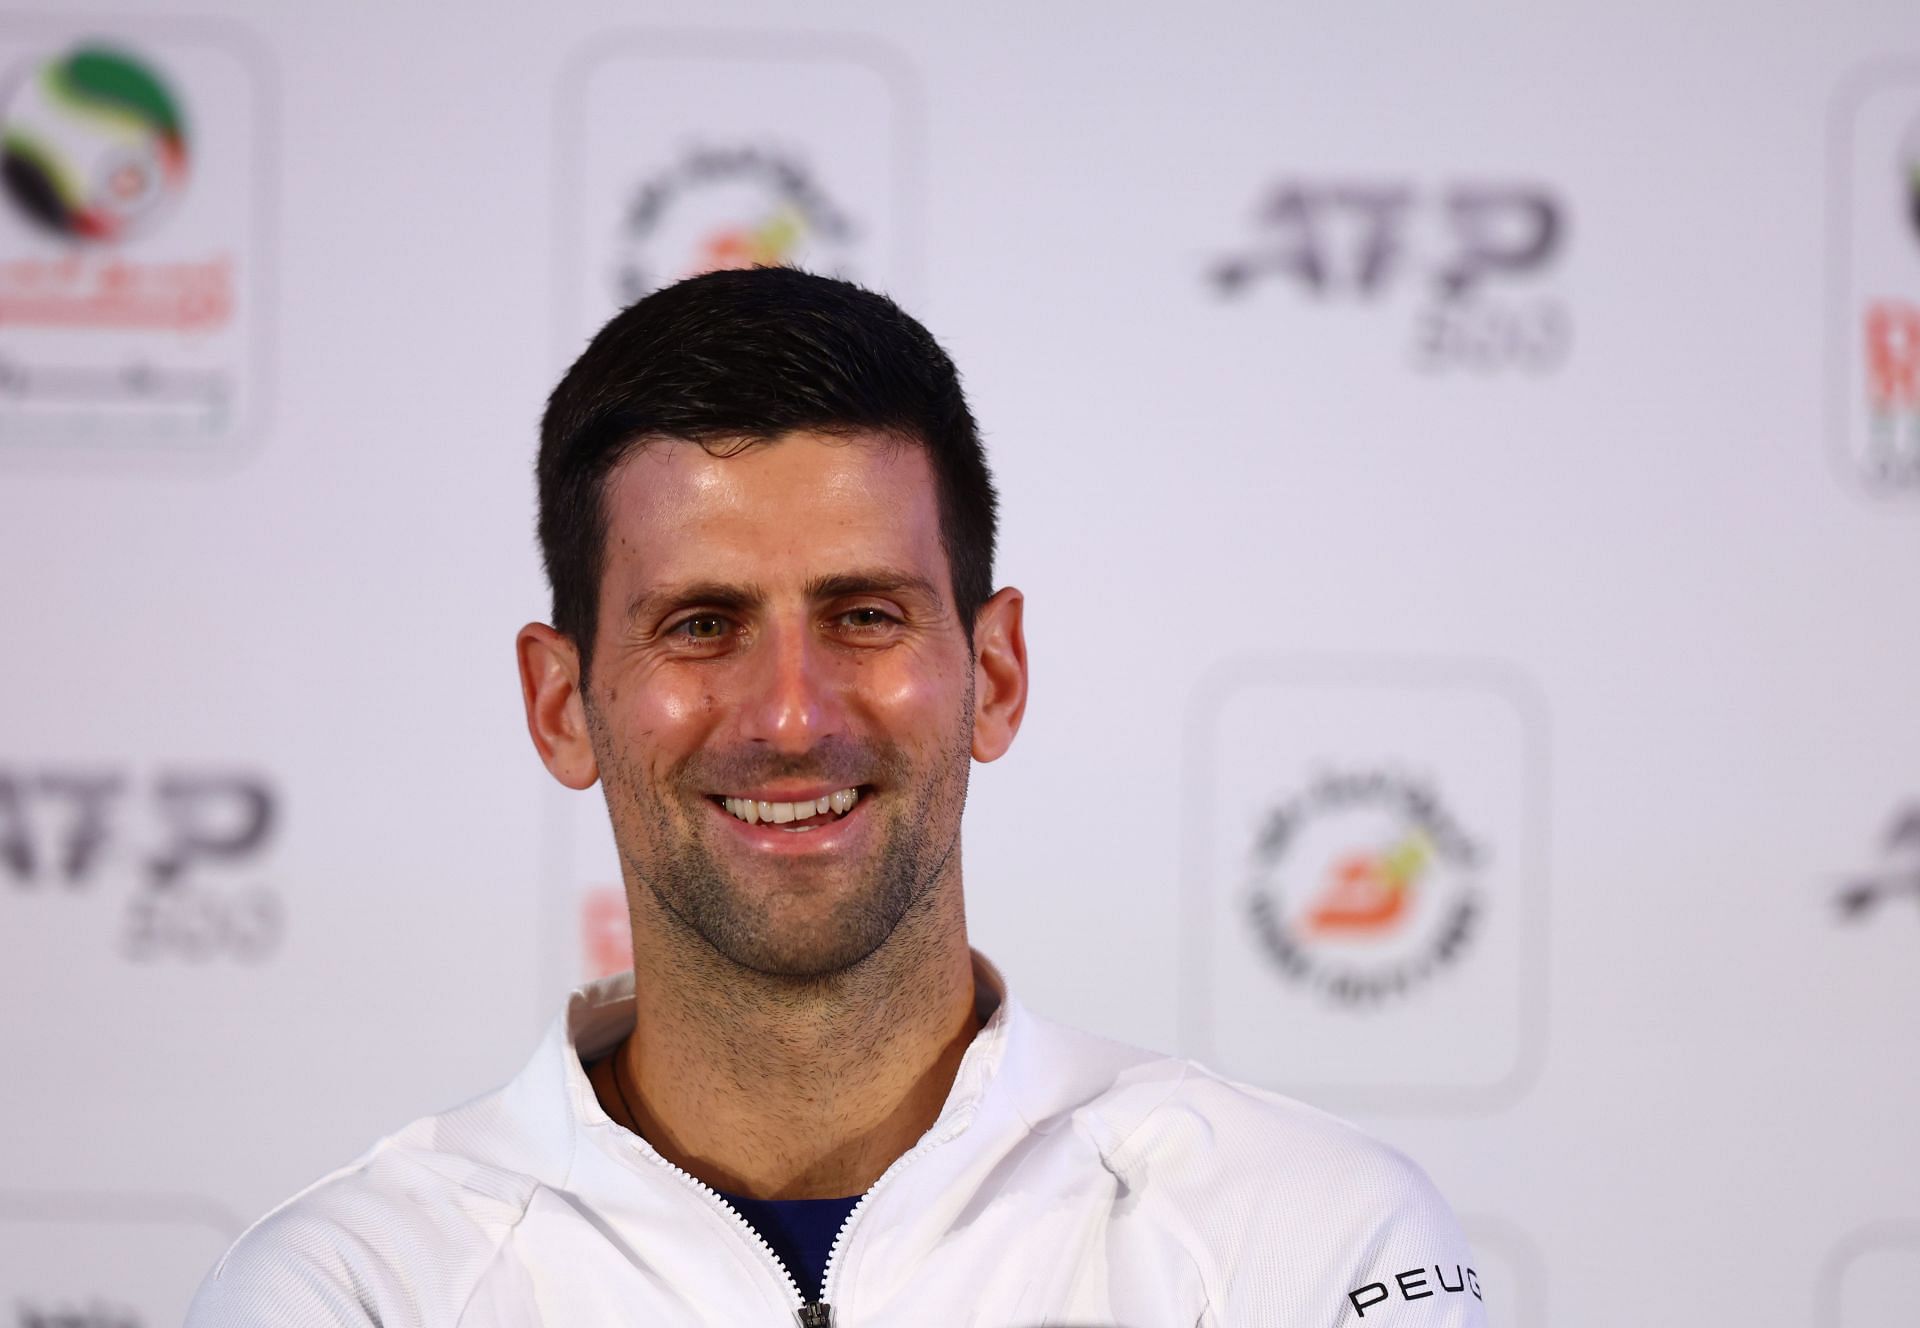 Novak Djokovic pictured in a press conference at the Dubai Duty-Free Tennis Championships.